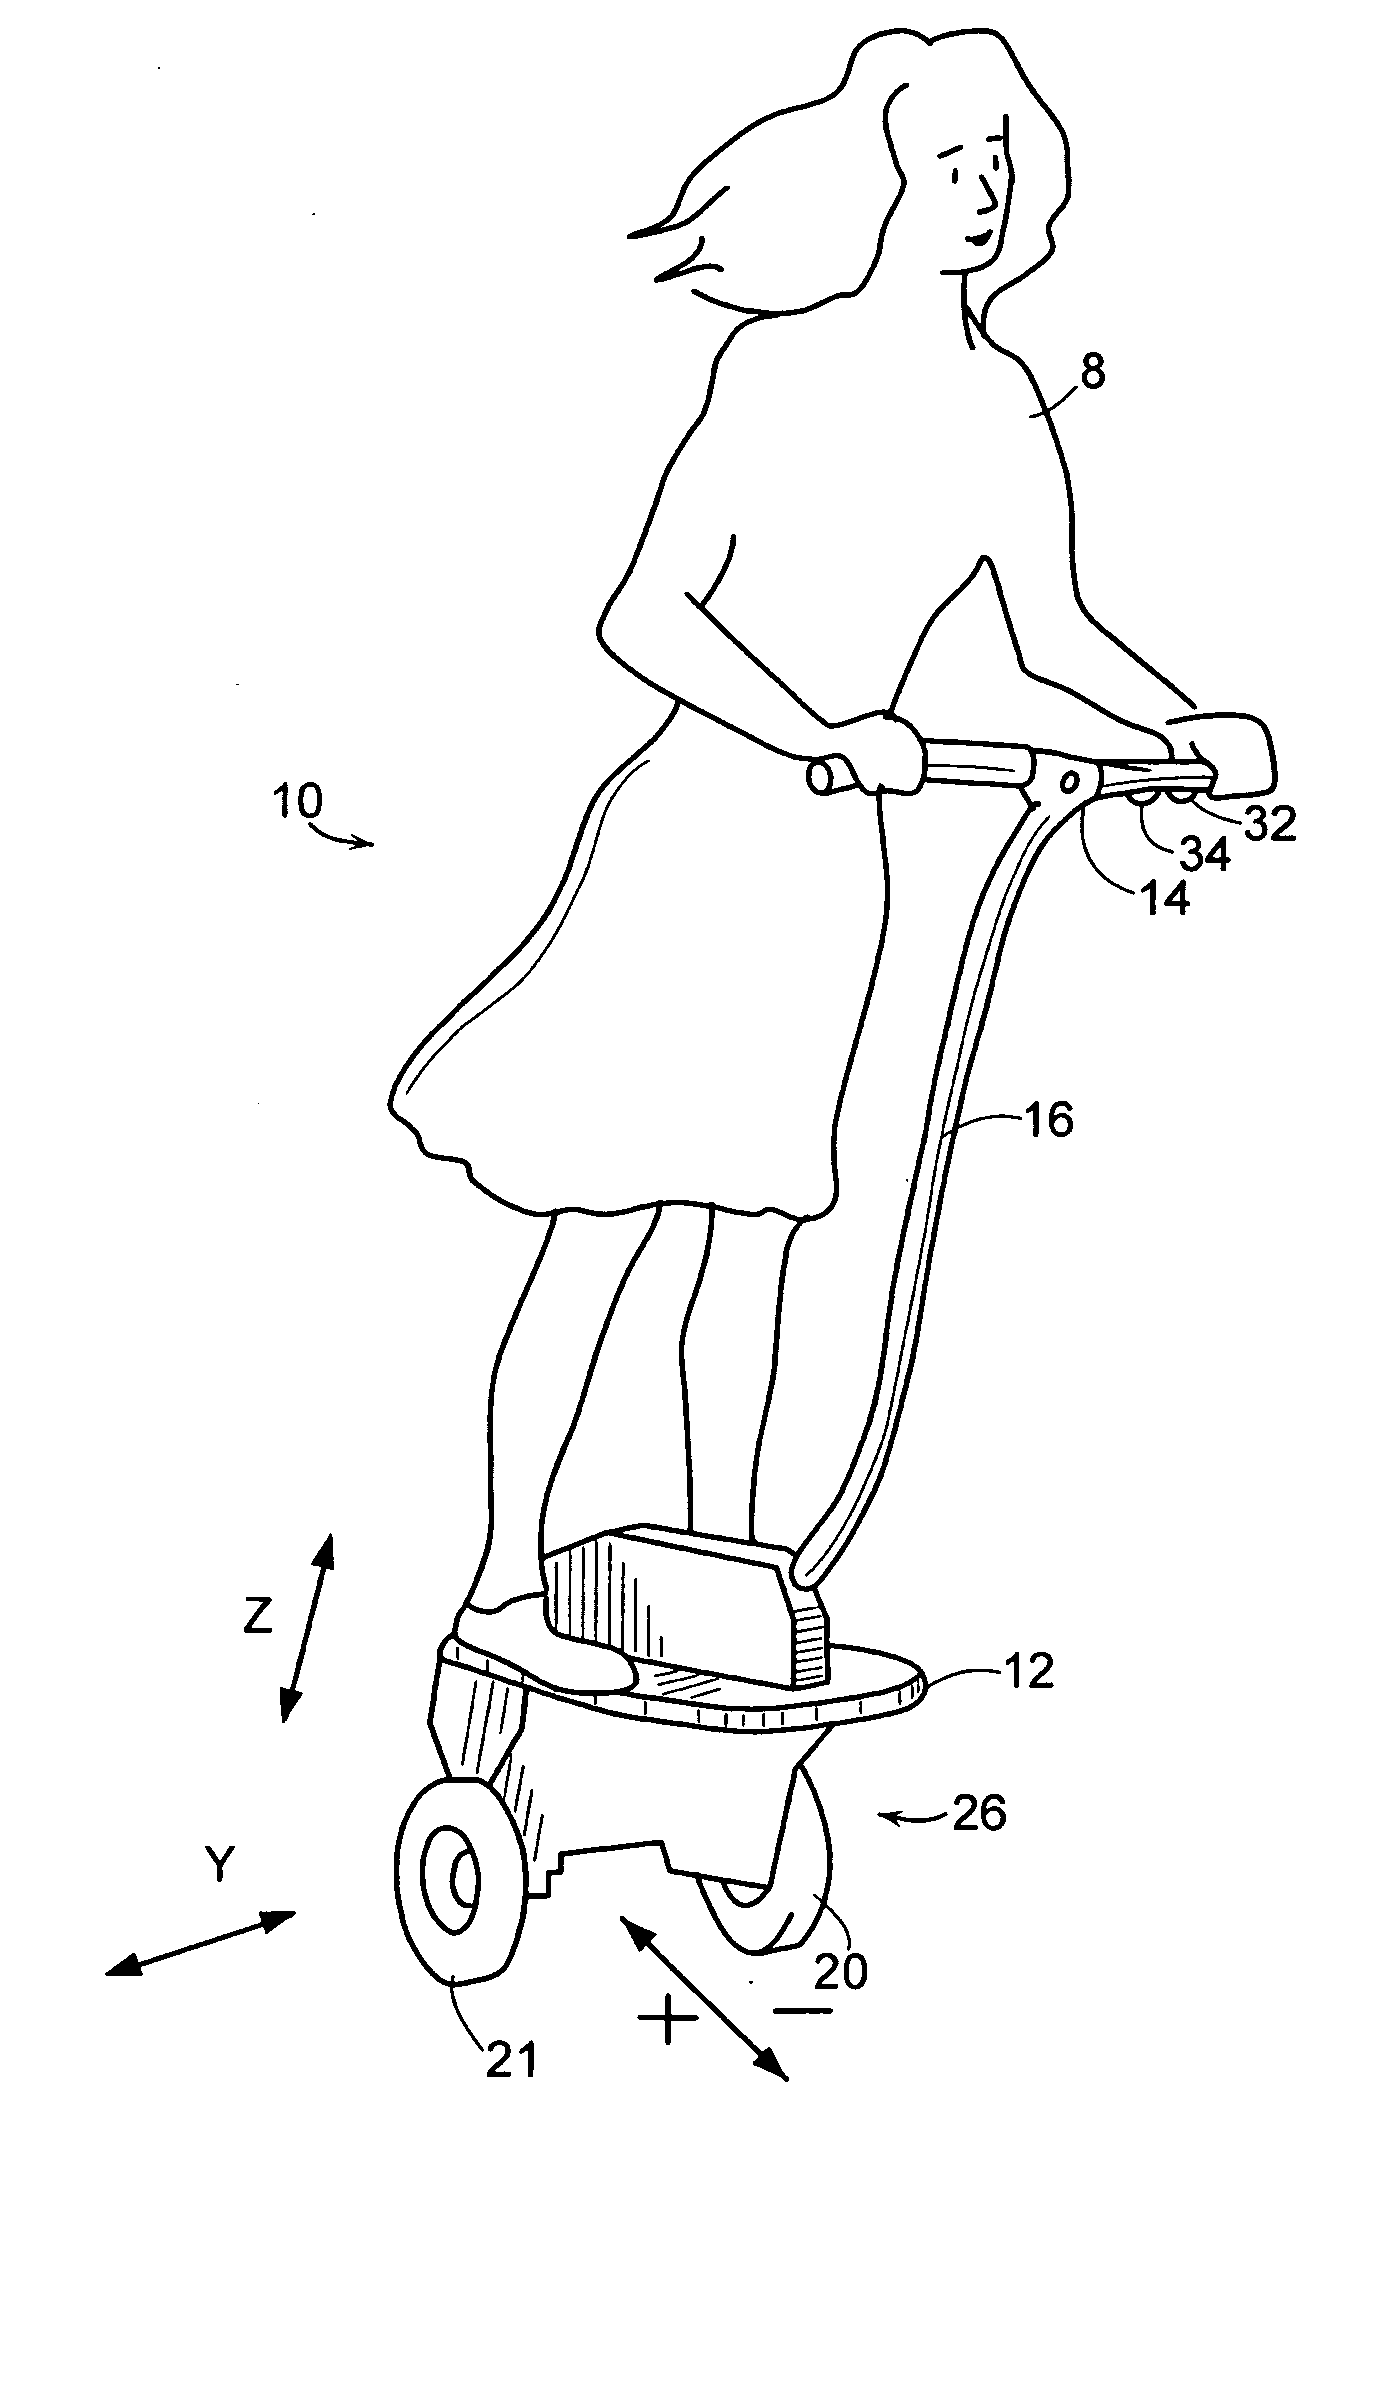 Control of a personal transporter based on user position